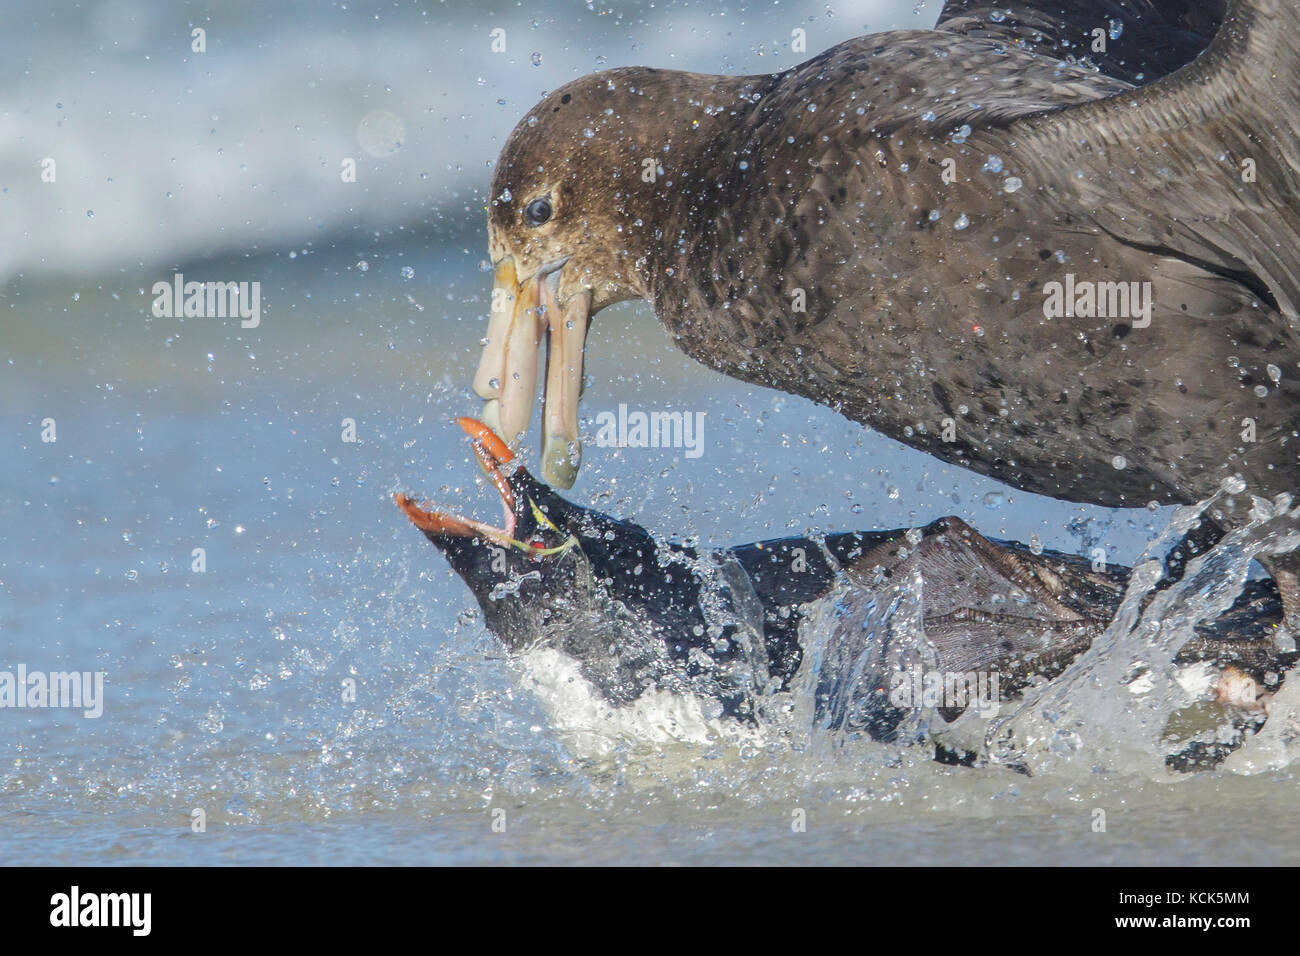 A Giant Petrel attacks a Rockhopper Penguin (Eudyptes chrysocome) as it emerges from the ocean in the Falkland Islands. Stock Photo